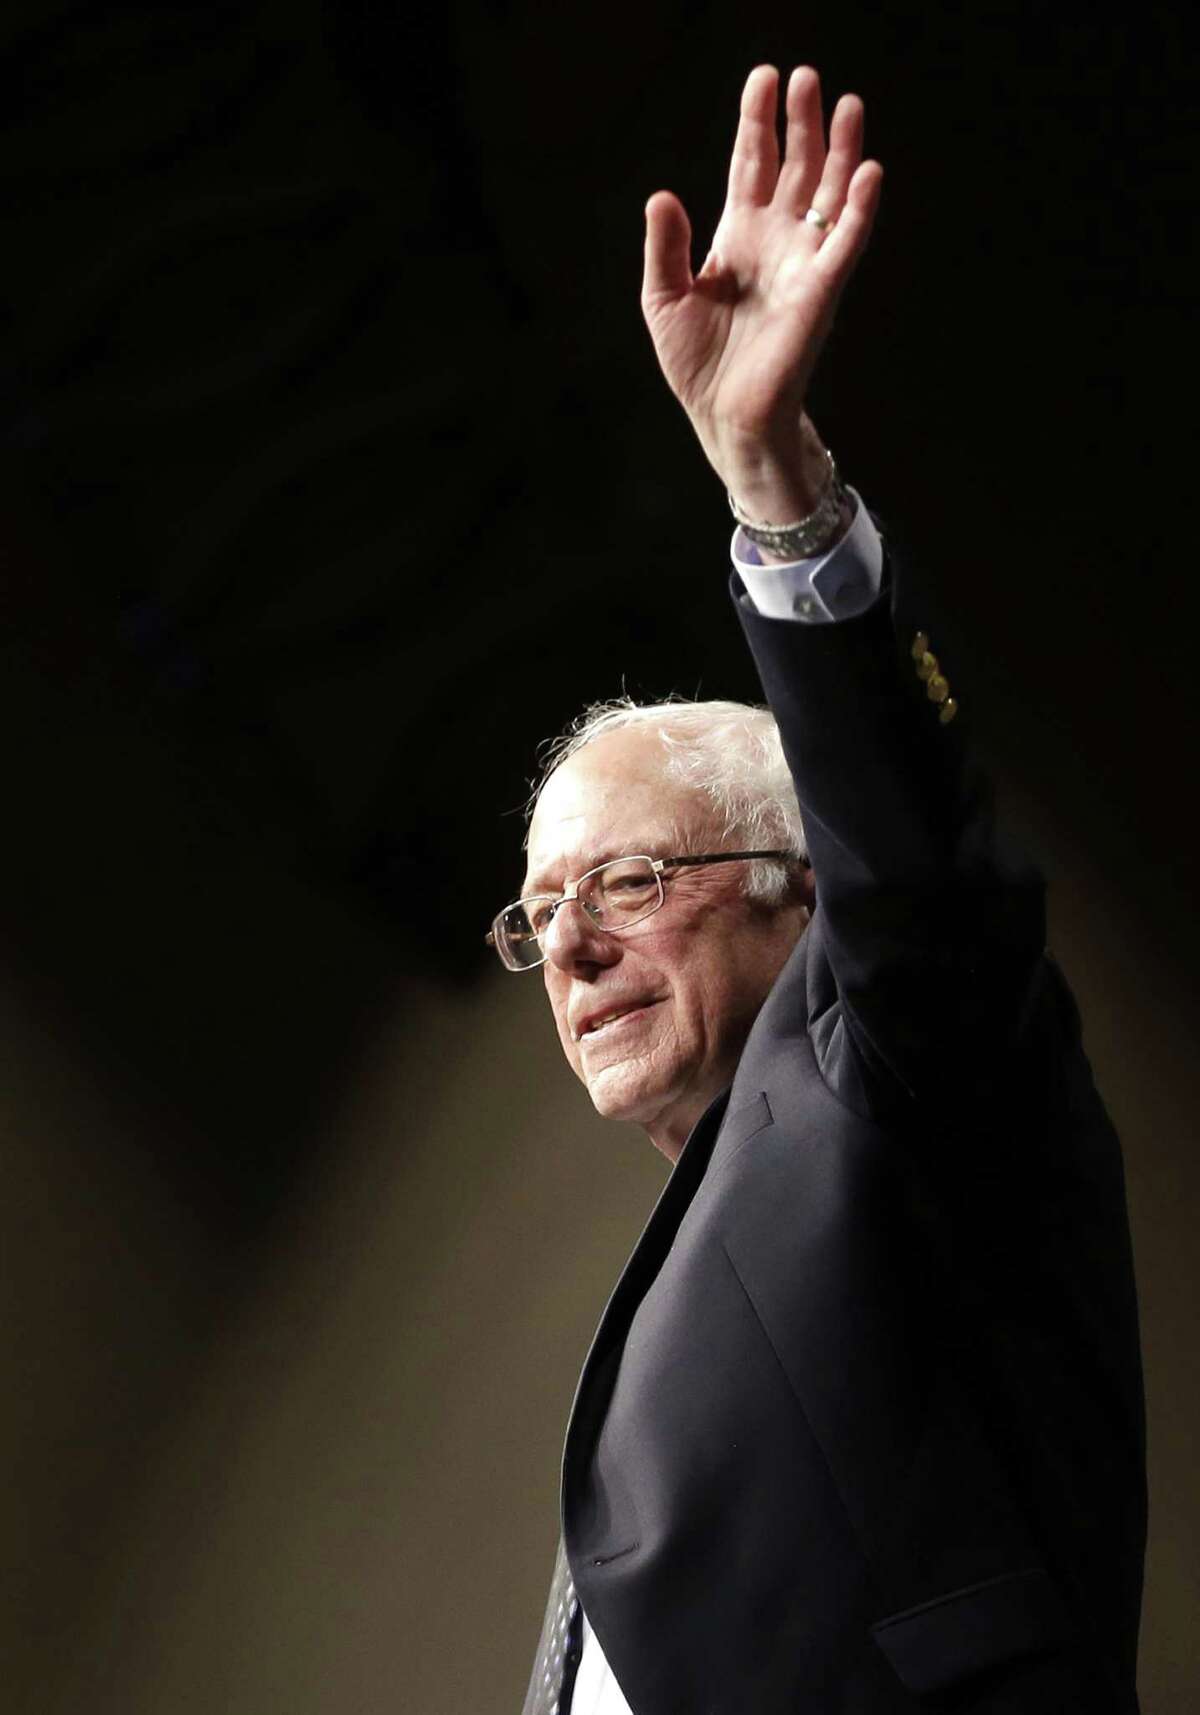 Vermont Sen. and former Democratic presidential candidate Bernie Sanders will join the populist group Our Revolution Texas for a speaking event at Trinity University next Friday.